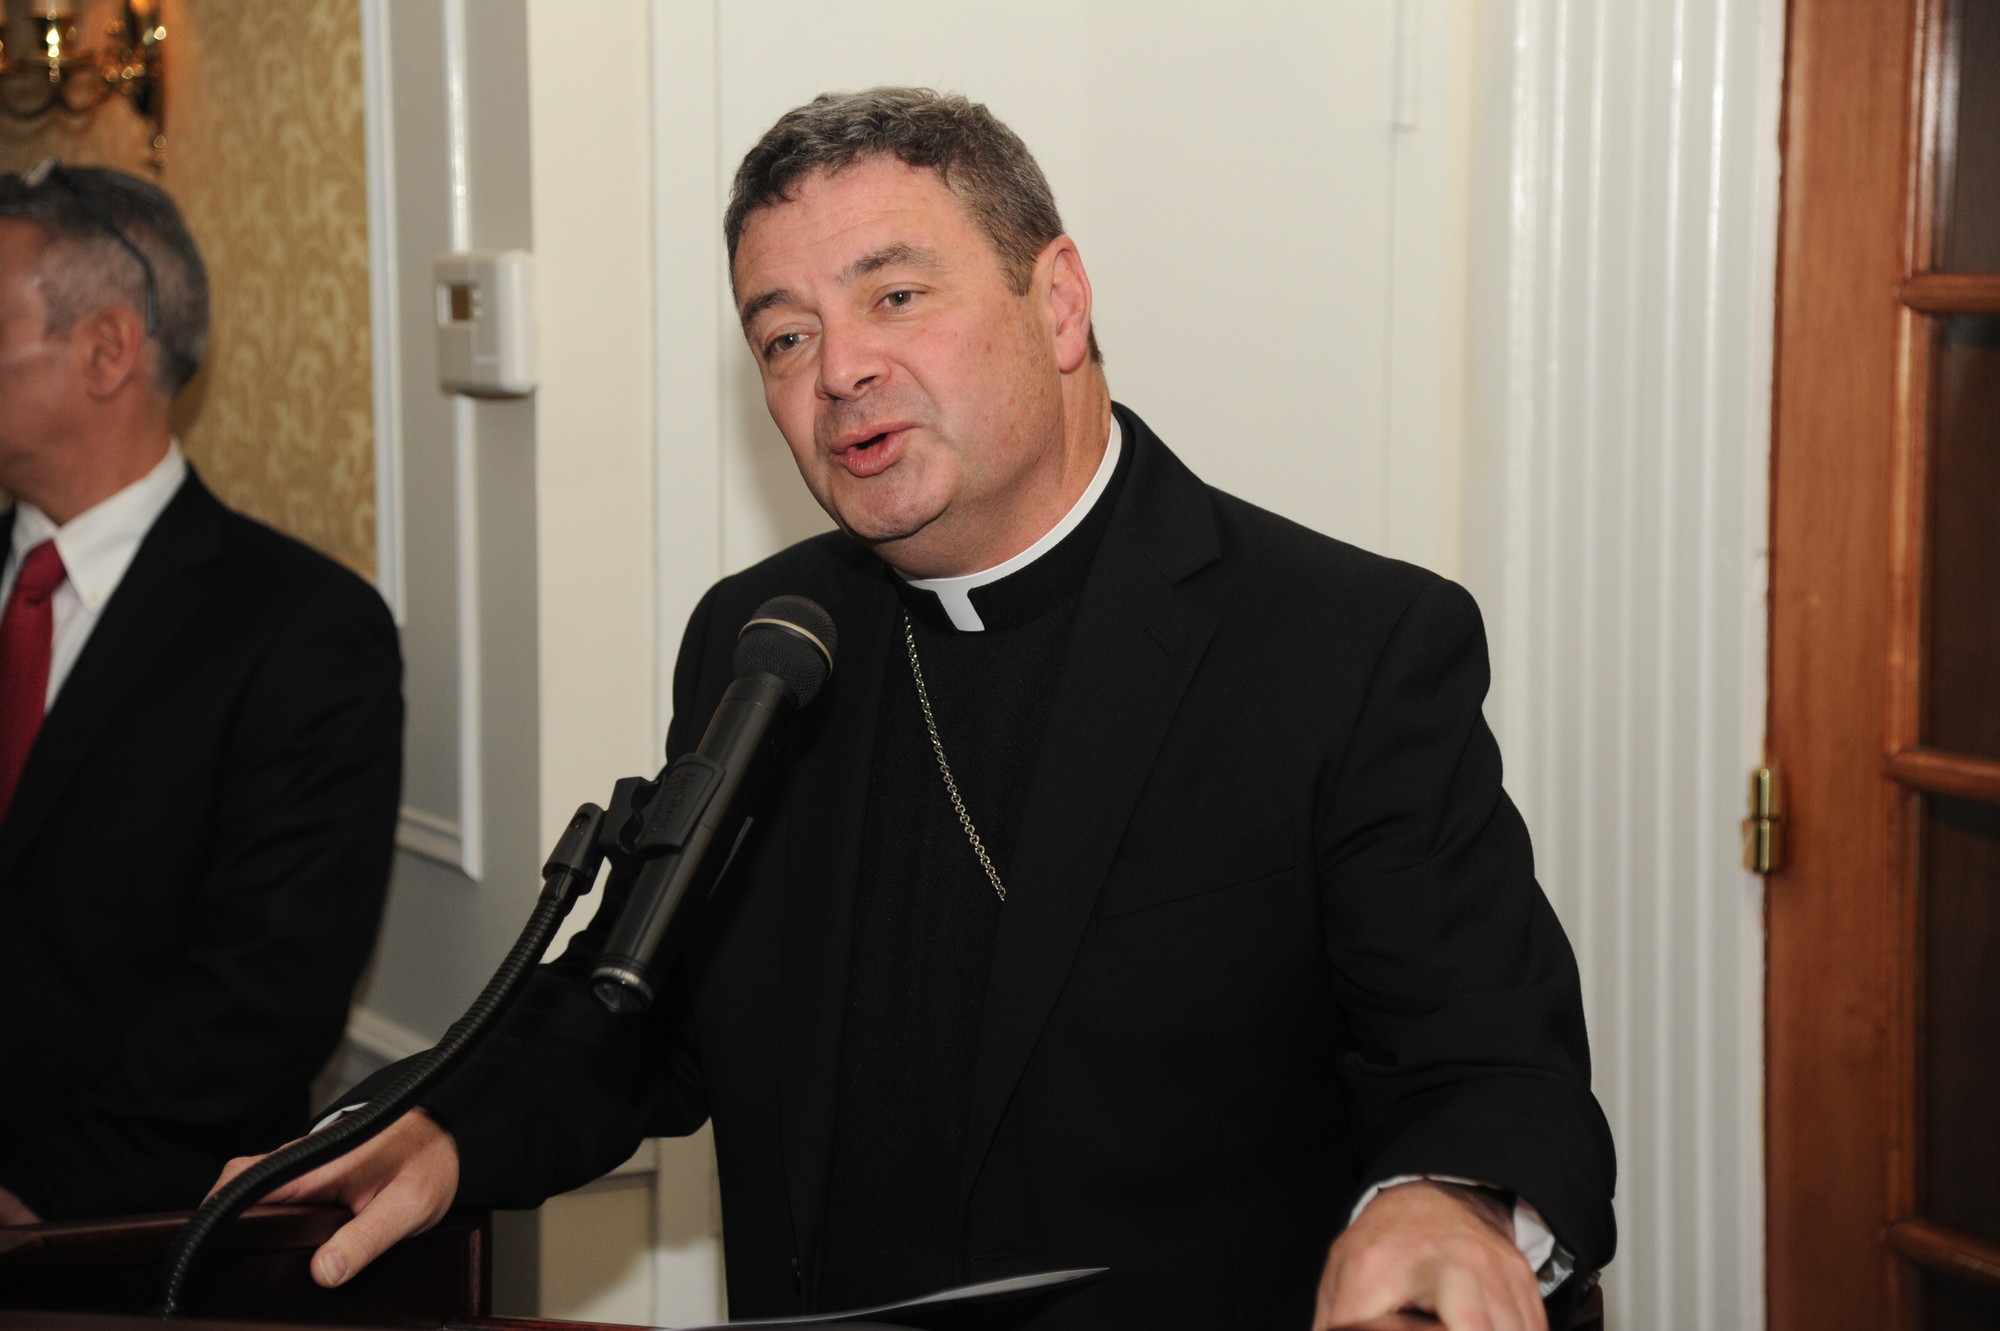 Auxiliary Bishop Robert Brennan addressed the audience.